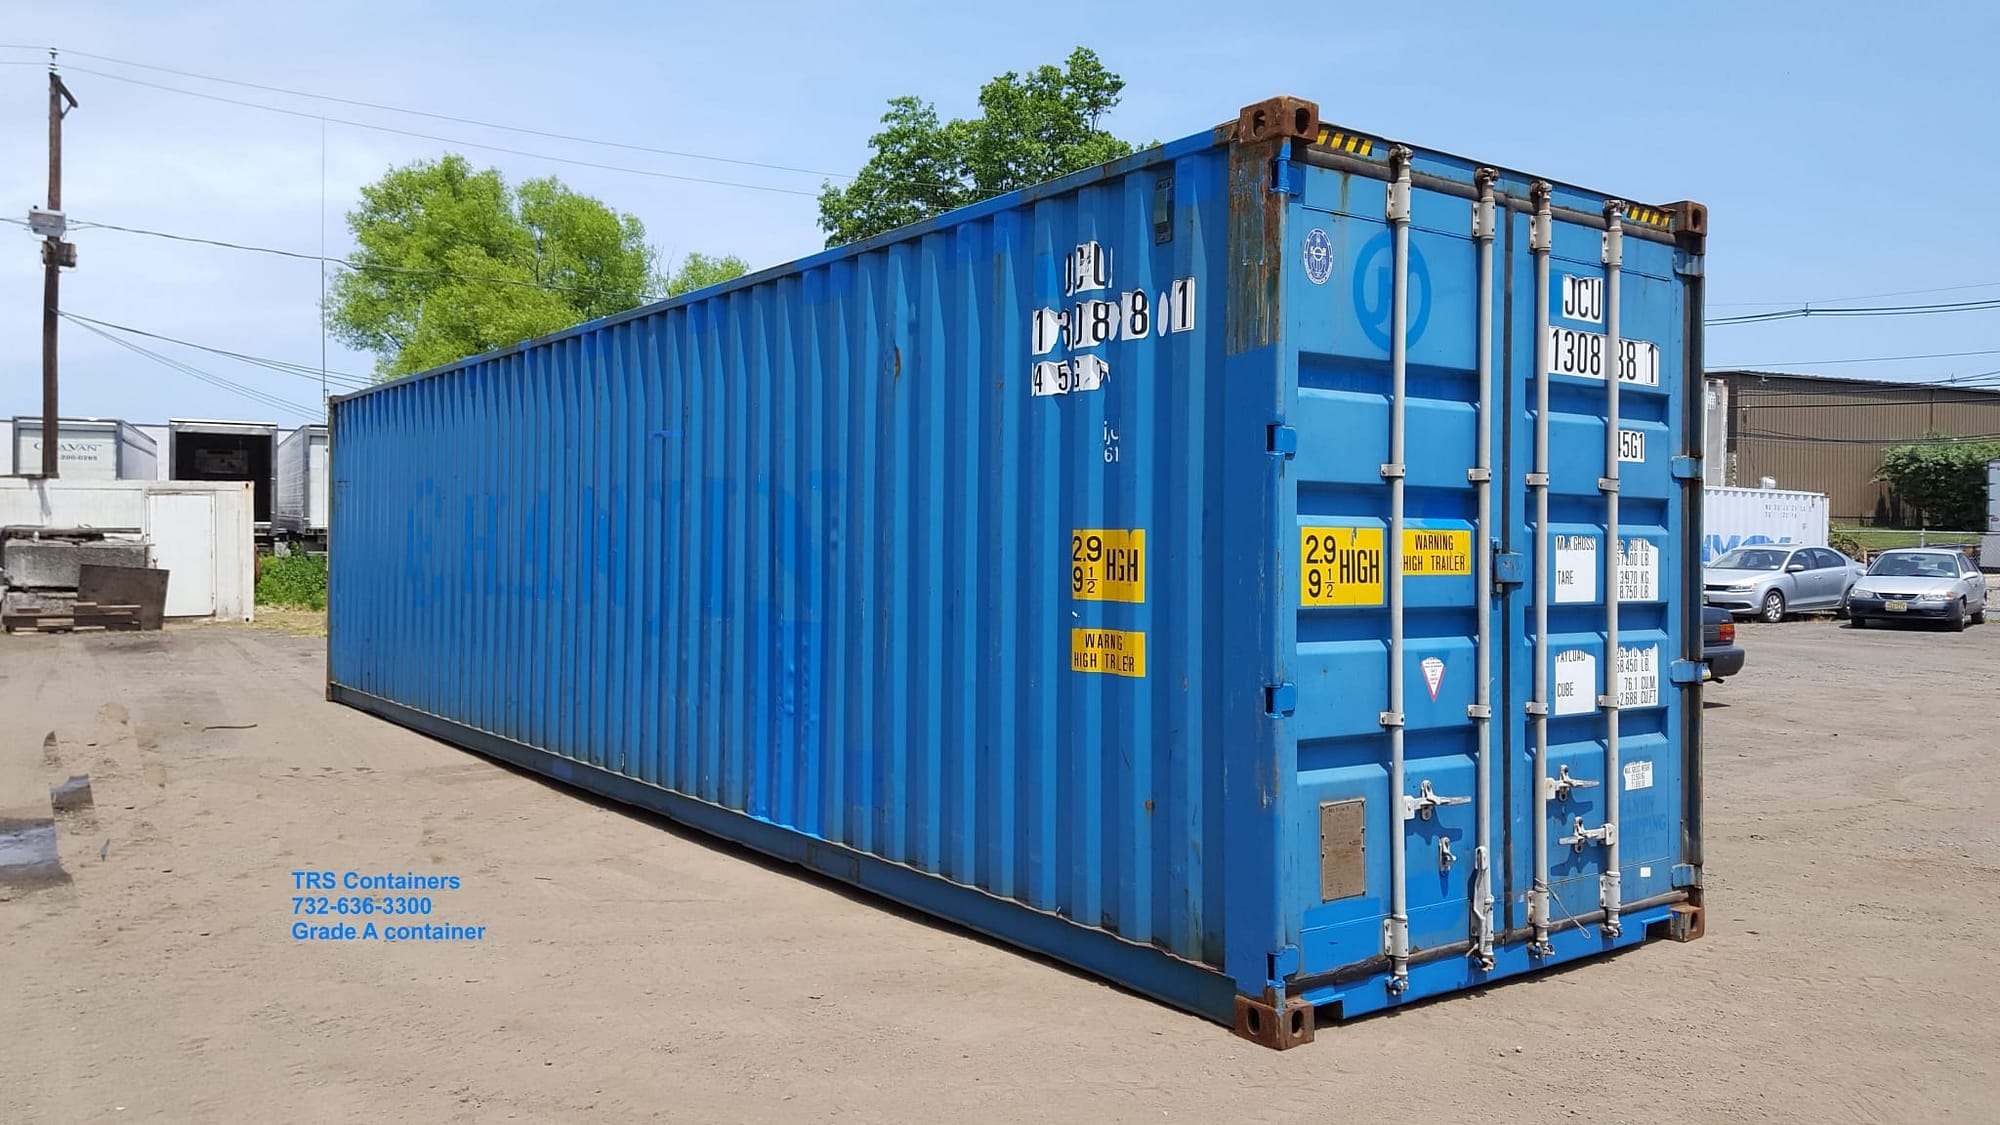 TRS Containers sells, rents and modifies 40 foot long steel highcube containers